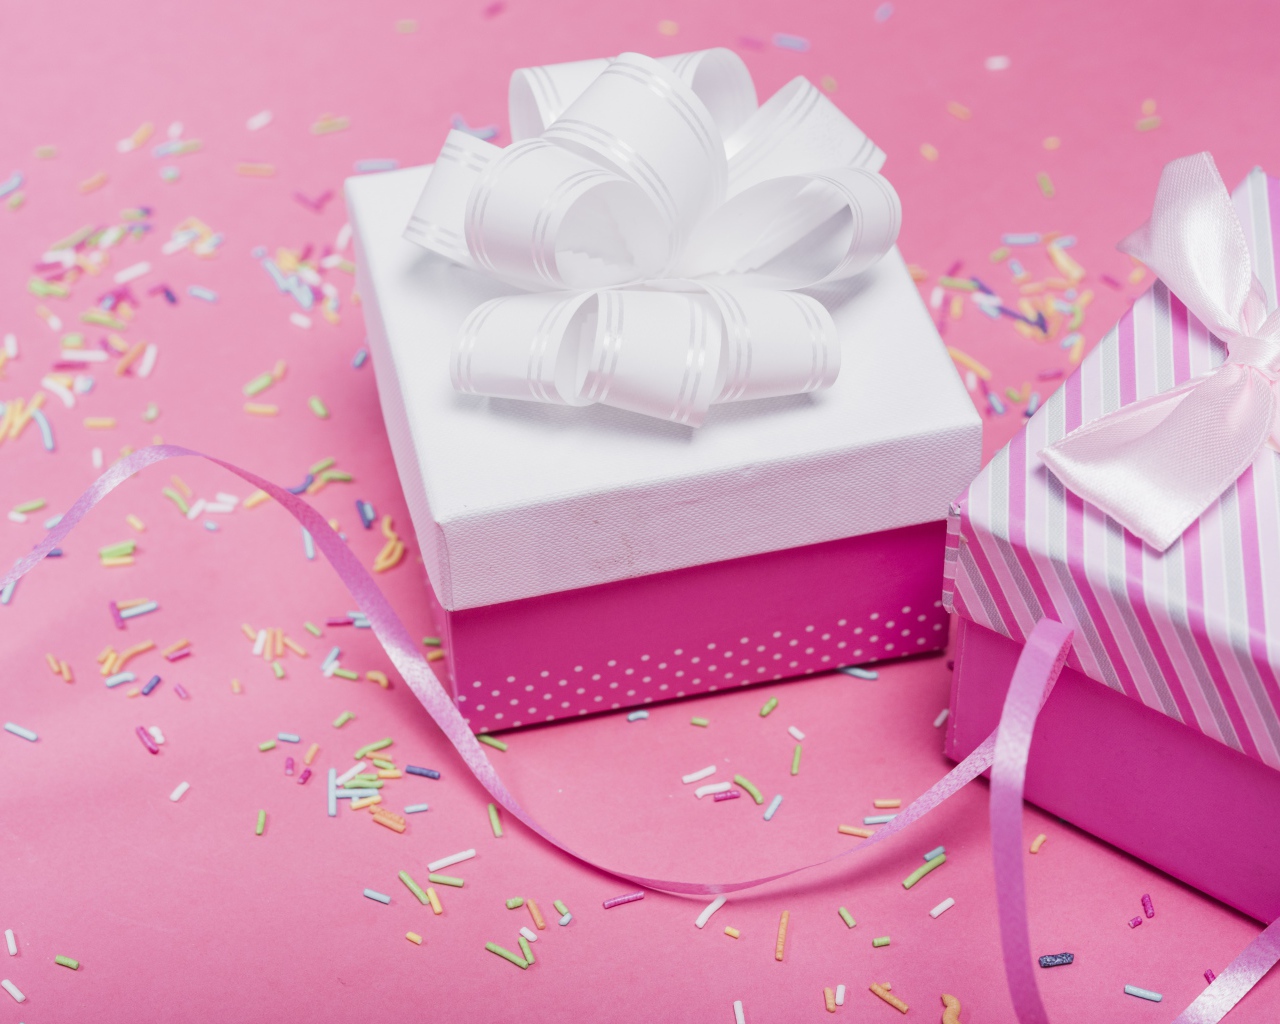 Two gift boxes with bows on a pink background